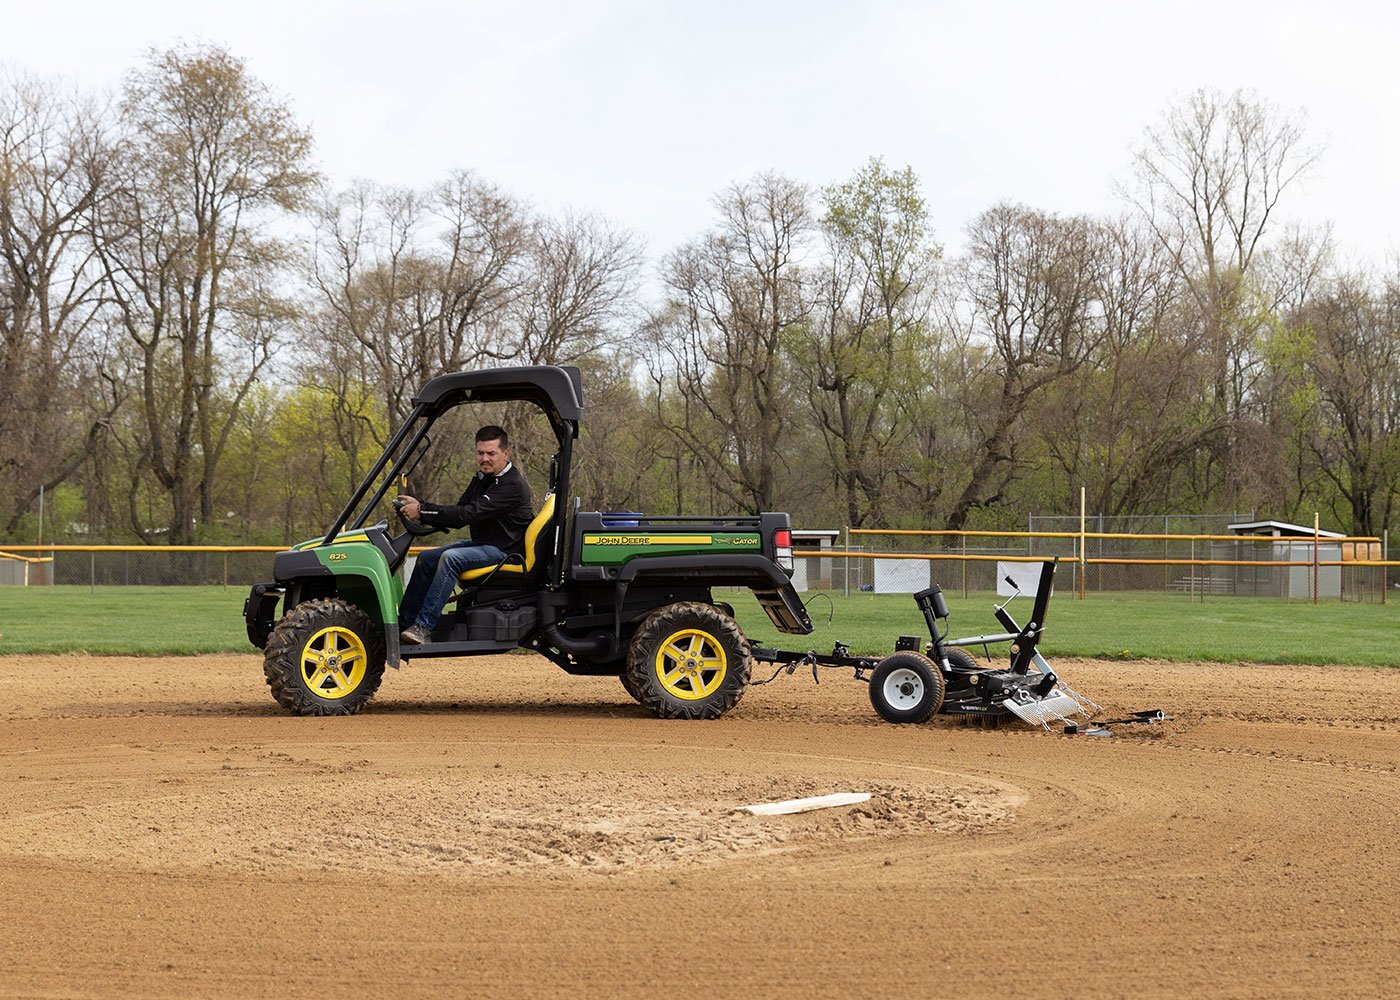 Pull behind groomer on gator for parks departments and other baseball and softball grooming needs on a budget 